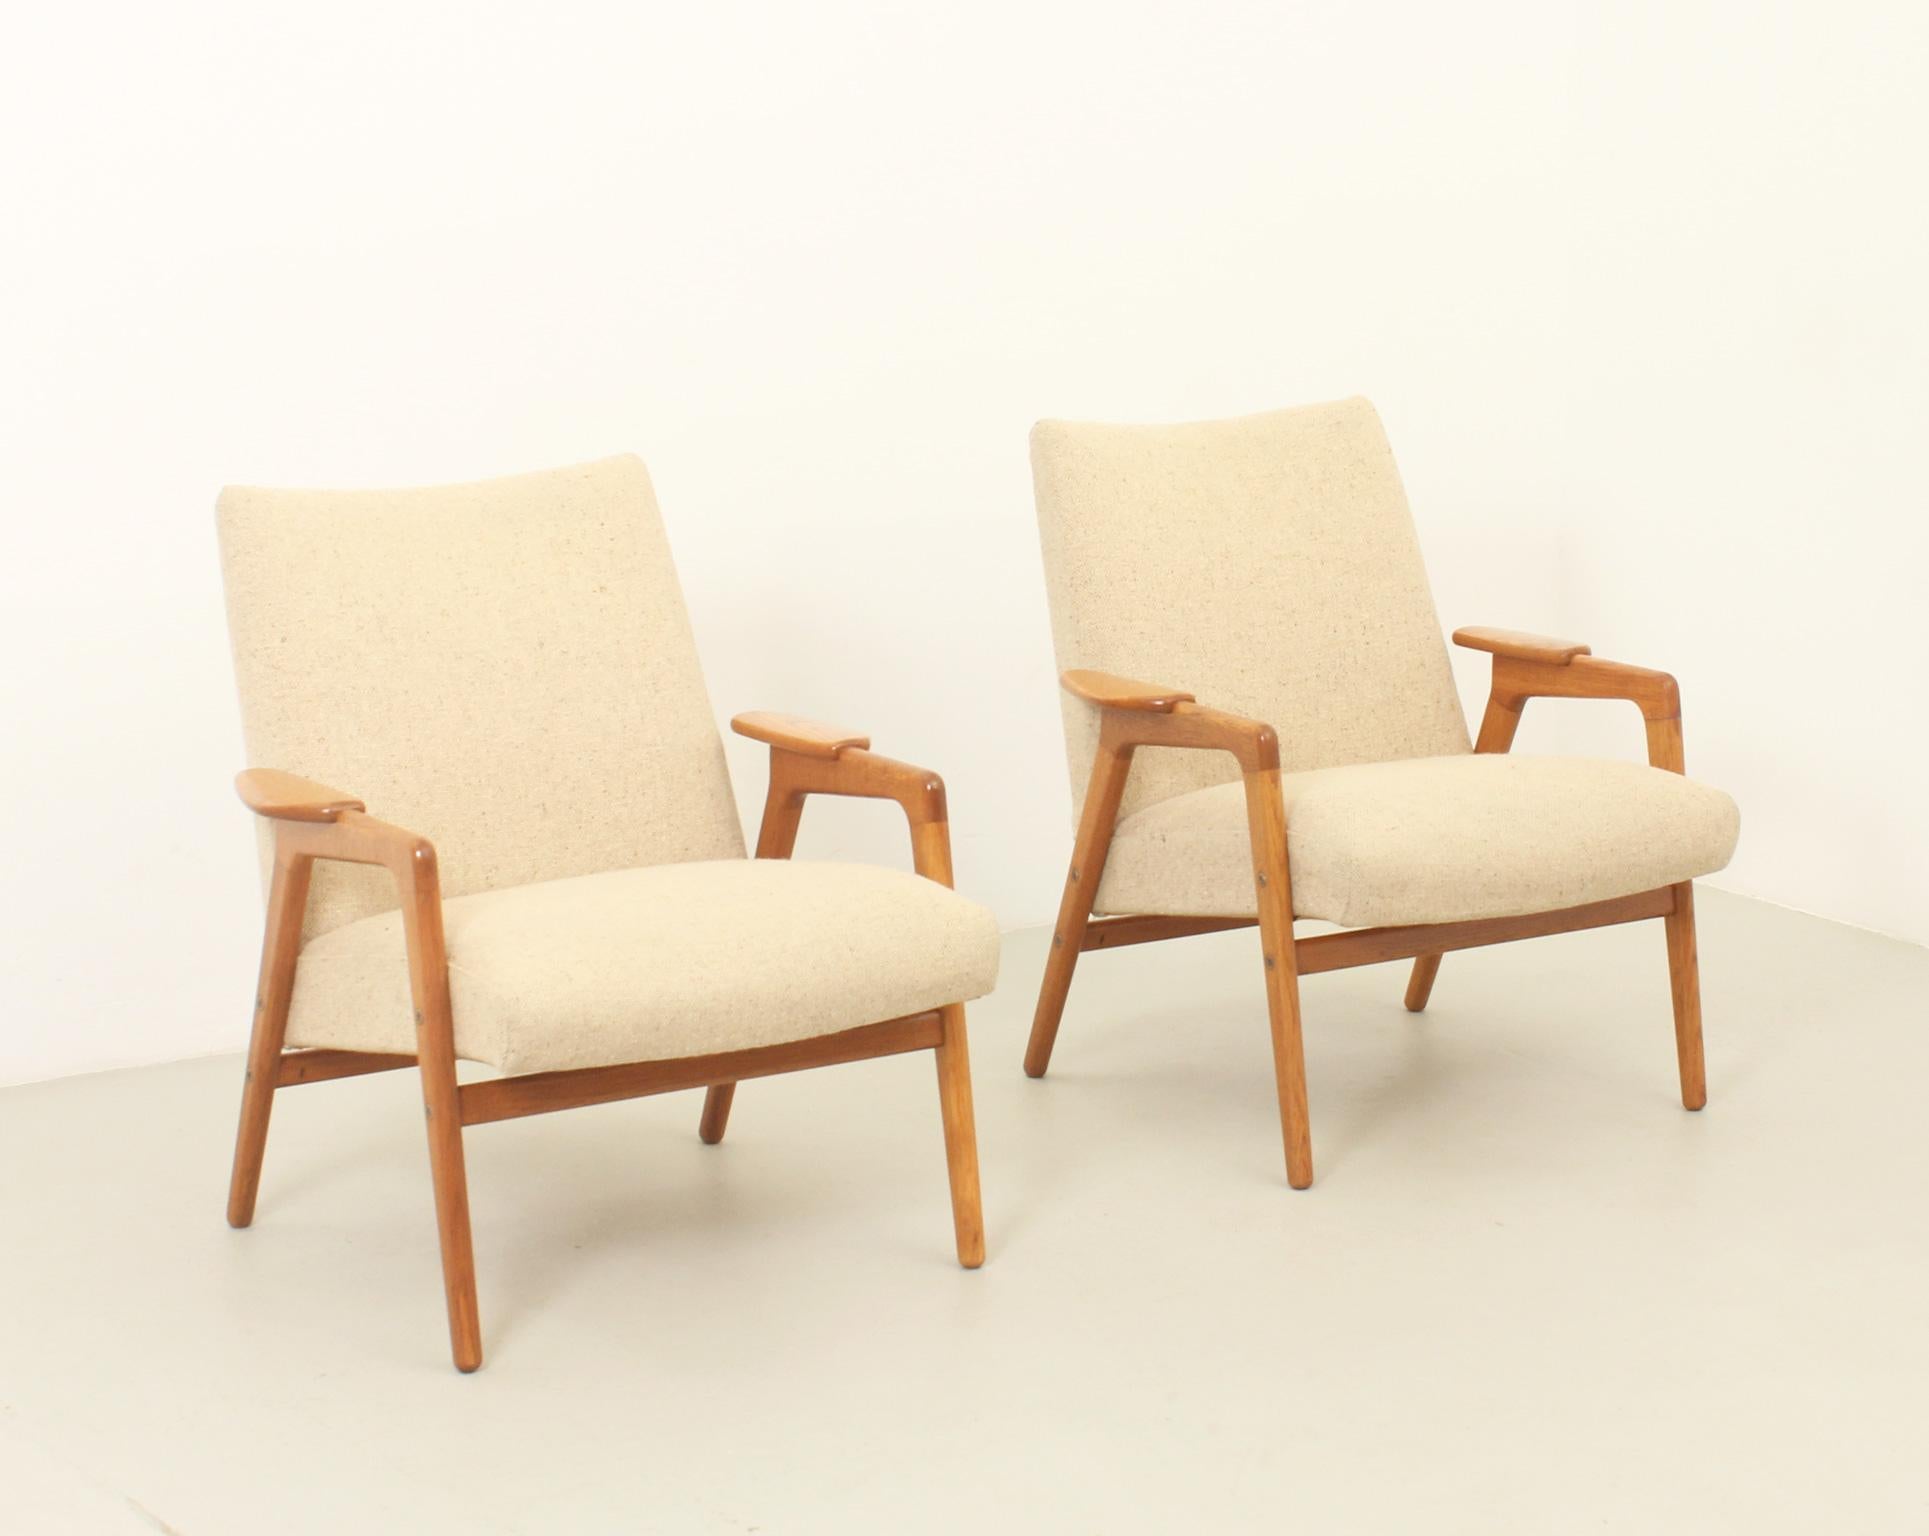 Pair of Ruster armchairs designed by Swedish designer Yngve Ekström and produced by dutch company Pastoe in Netherlands, 1960's. Structure with solid oak wood and original upholstery with wool fabric. 